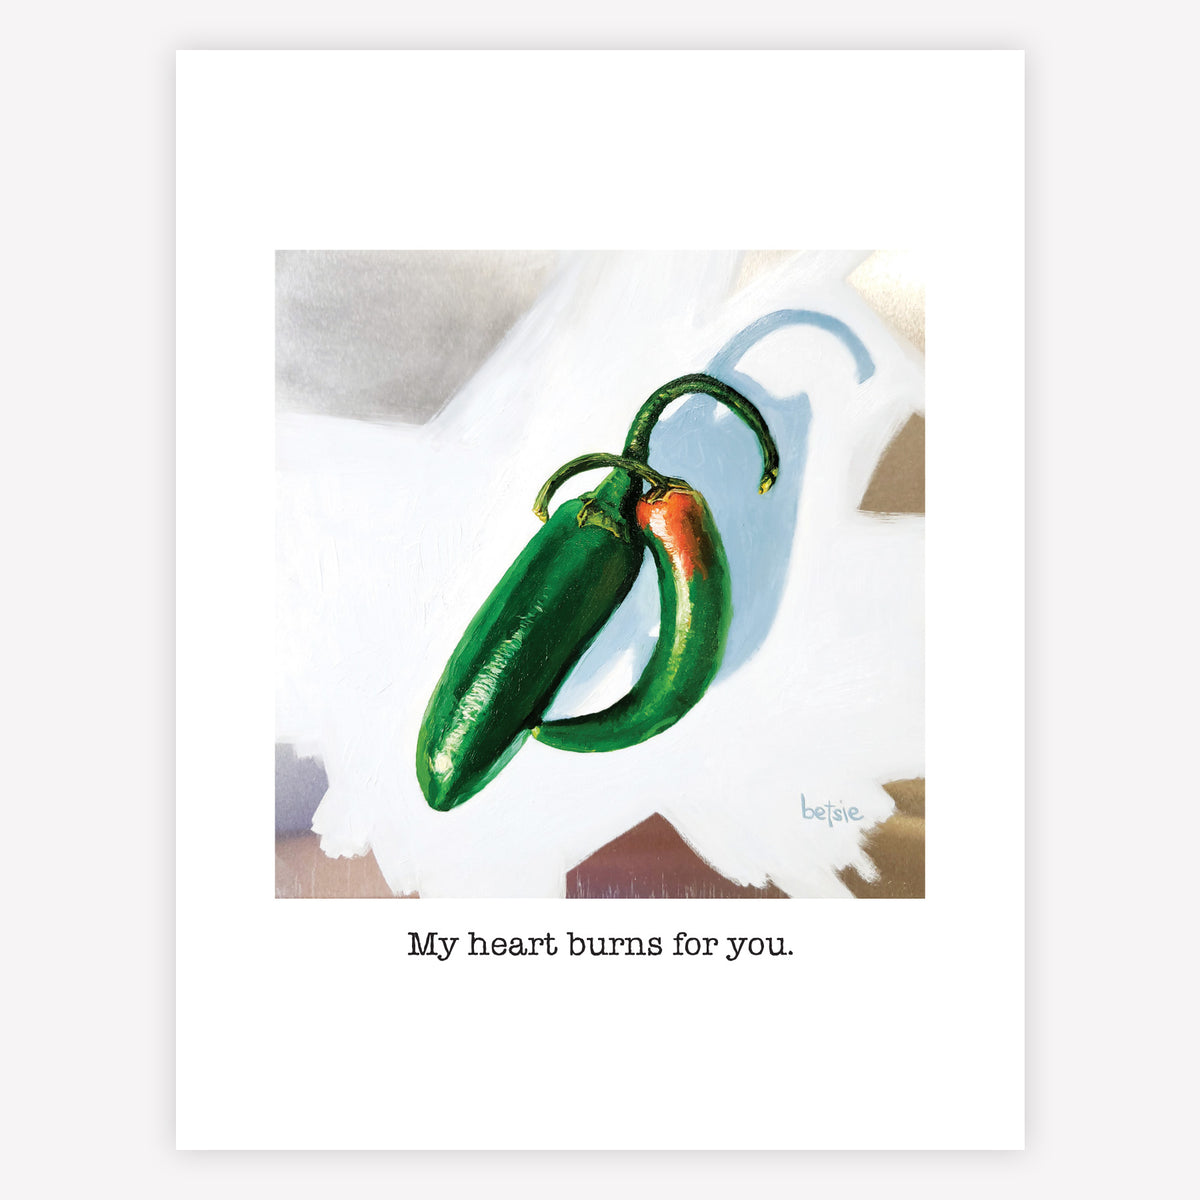 "My heart burns for you" Greeting Card